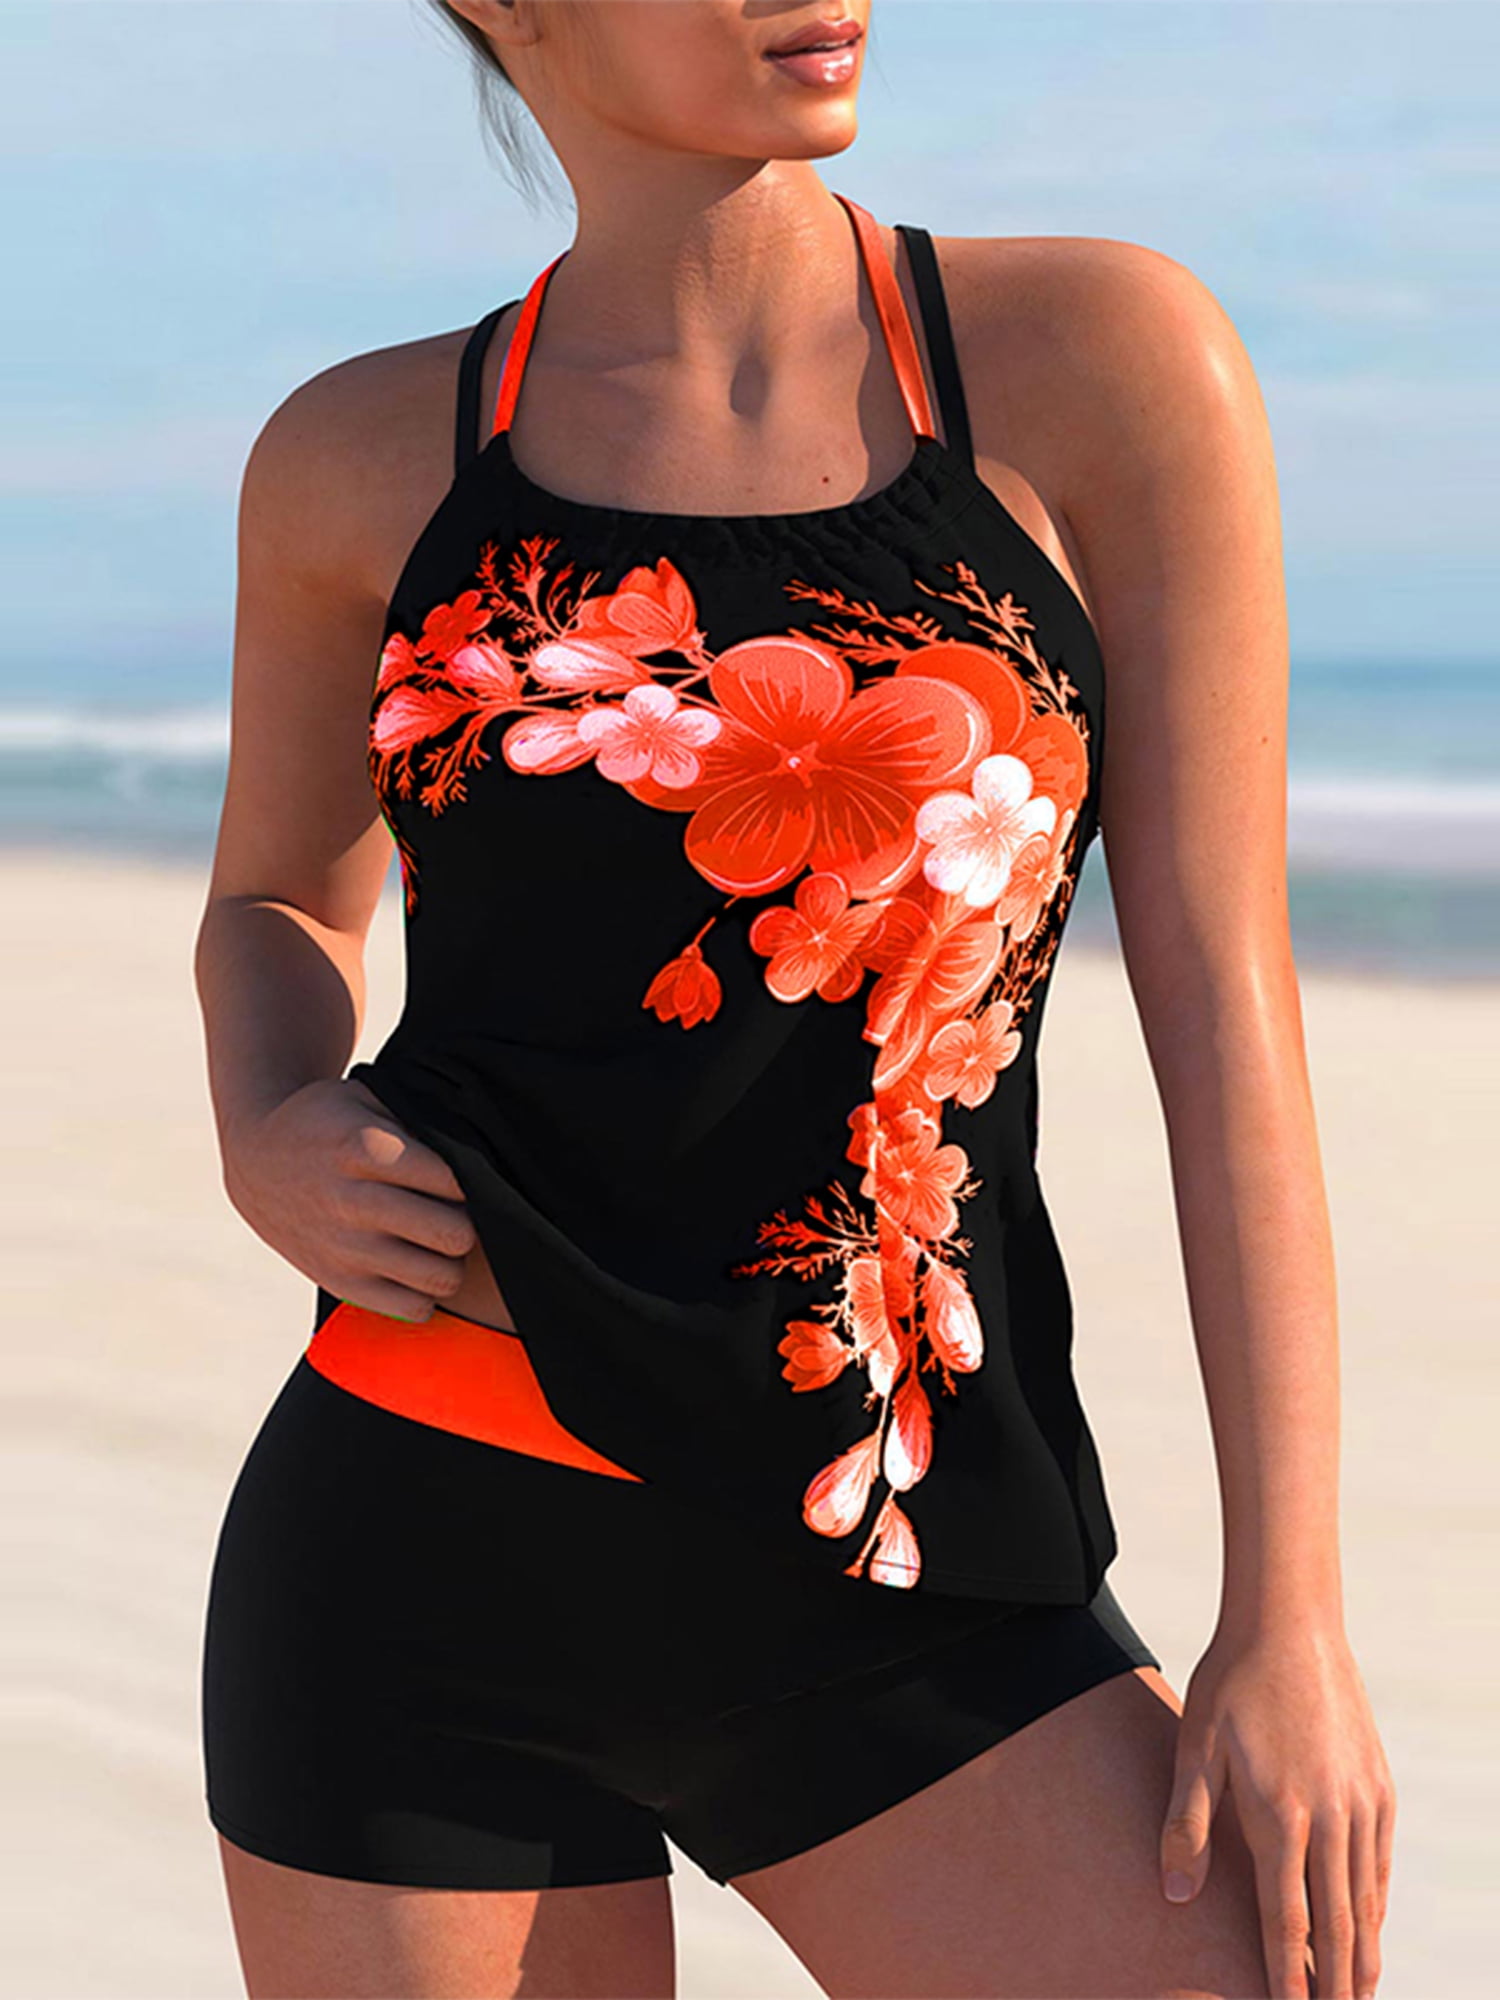 NKOOGH Romper Swimsuits for Women Swimsuit Top Halter Blouson Tankini  Swimsuits for Women Loose Fit Floral Printed Two Piece Bathing Suits